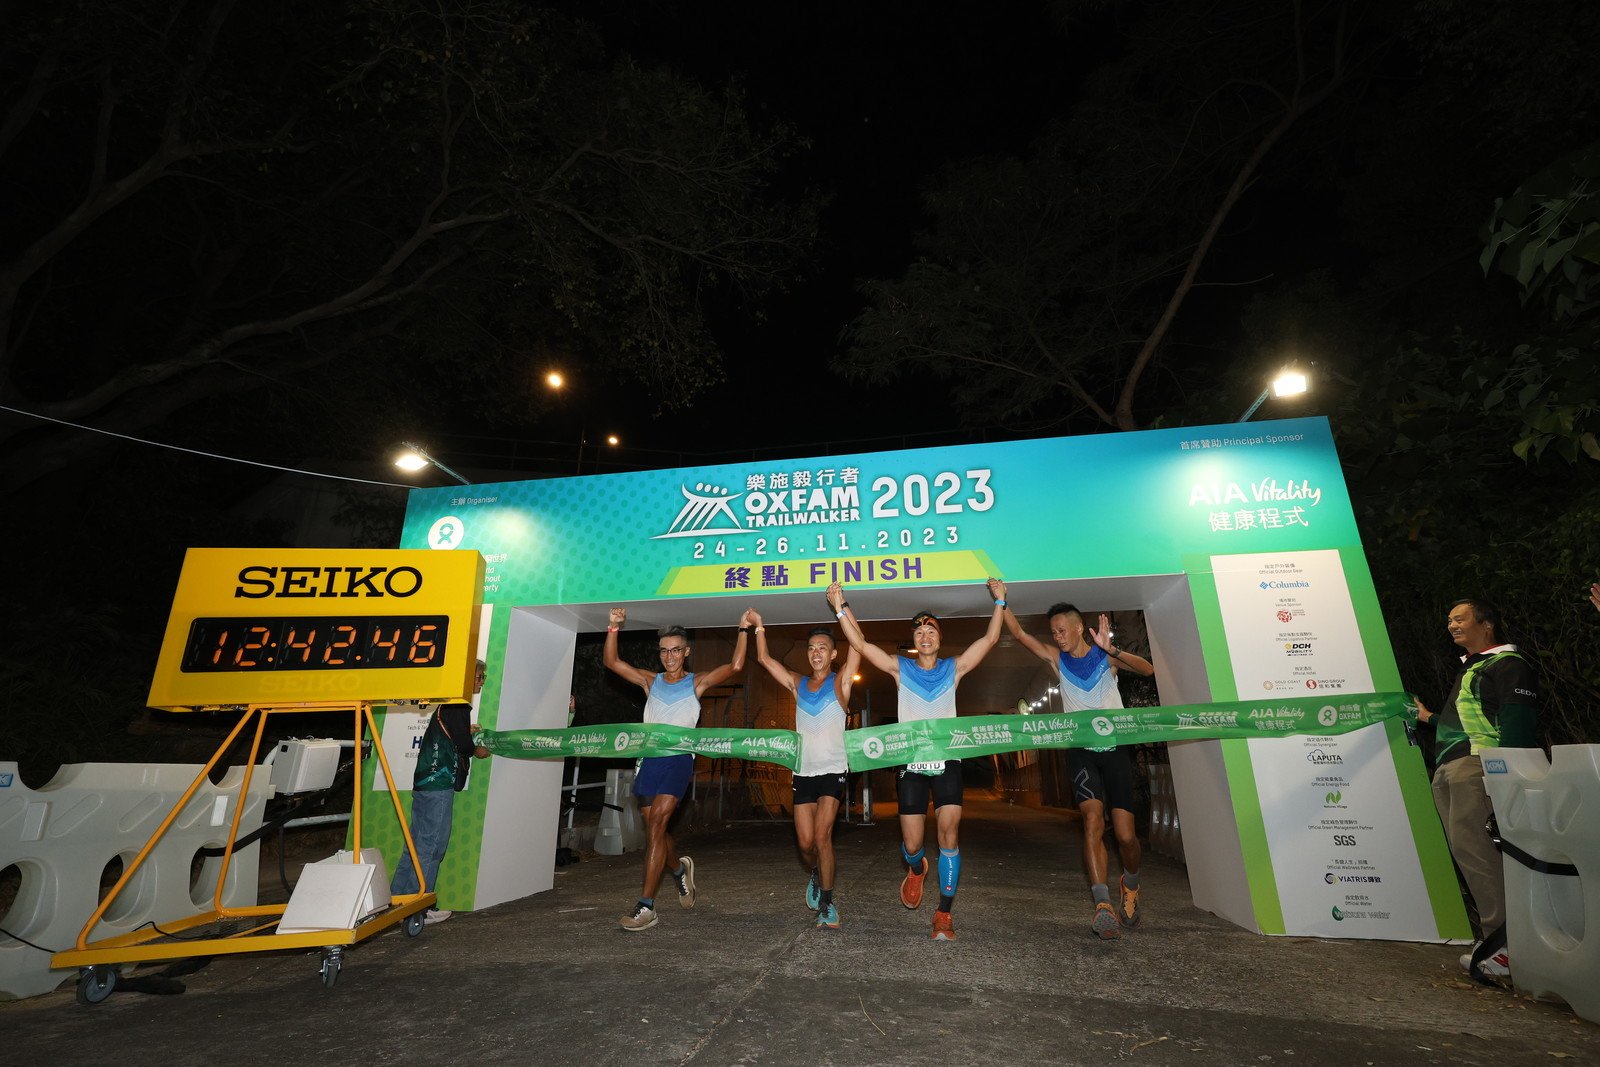 In just 12 hours and 42 minutes, team no. 8001 was the first team to complete Oxfam Trailwalker (OTW) 2023.